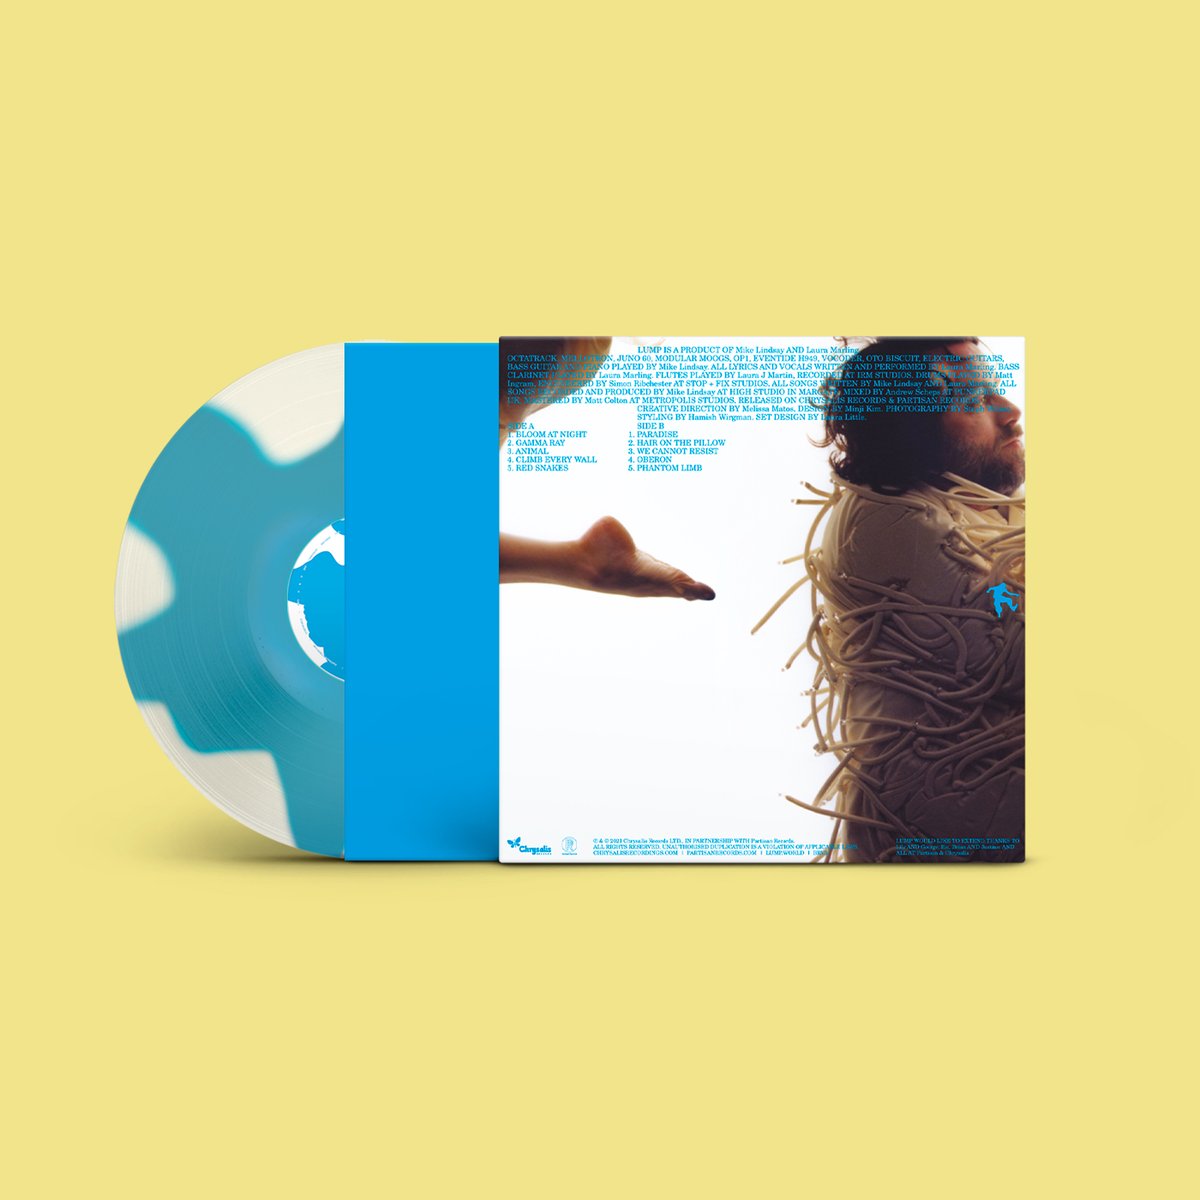 Less than two weeks until ANIMAL is out! As with all things covid these days, there have been a couple delays on the blue and white vinyl, so it will be shipping a few weeks late, everything else is looking dandy. Thank you to no end for your support and your patience.